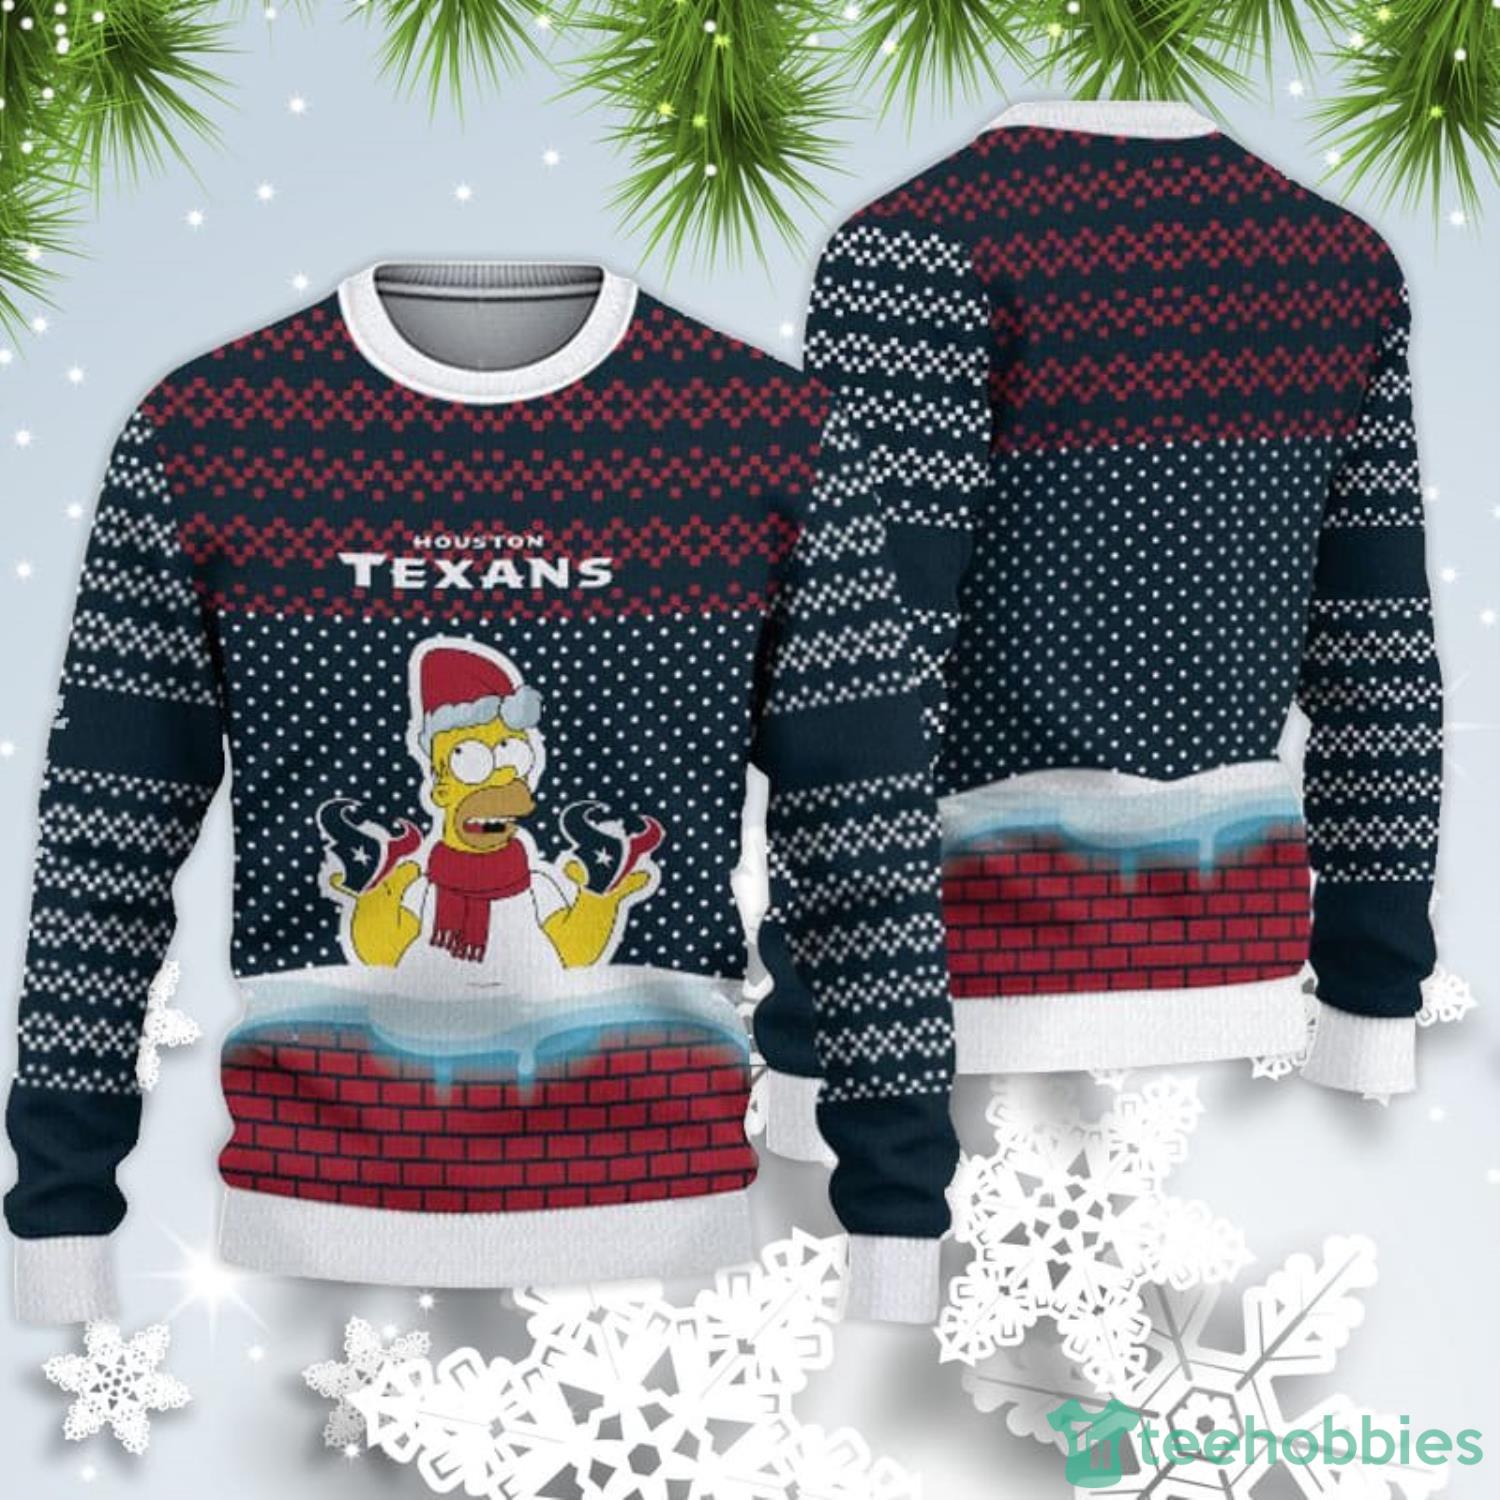 Houston Texans Christmas Simpson Sweater For Fans Product Photo 1